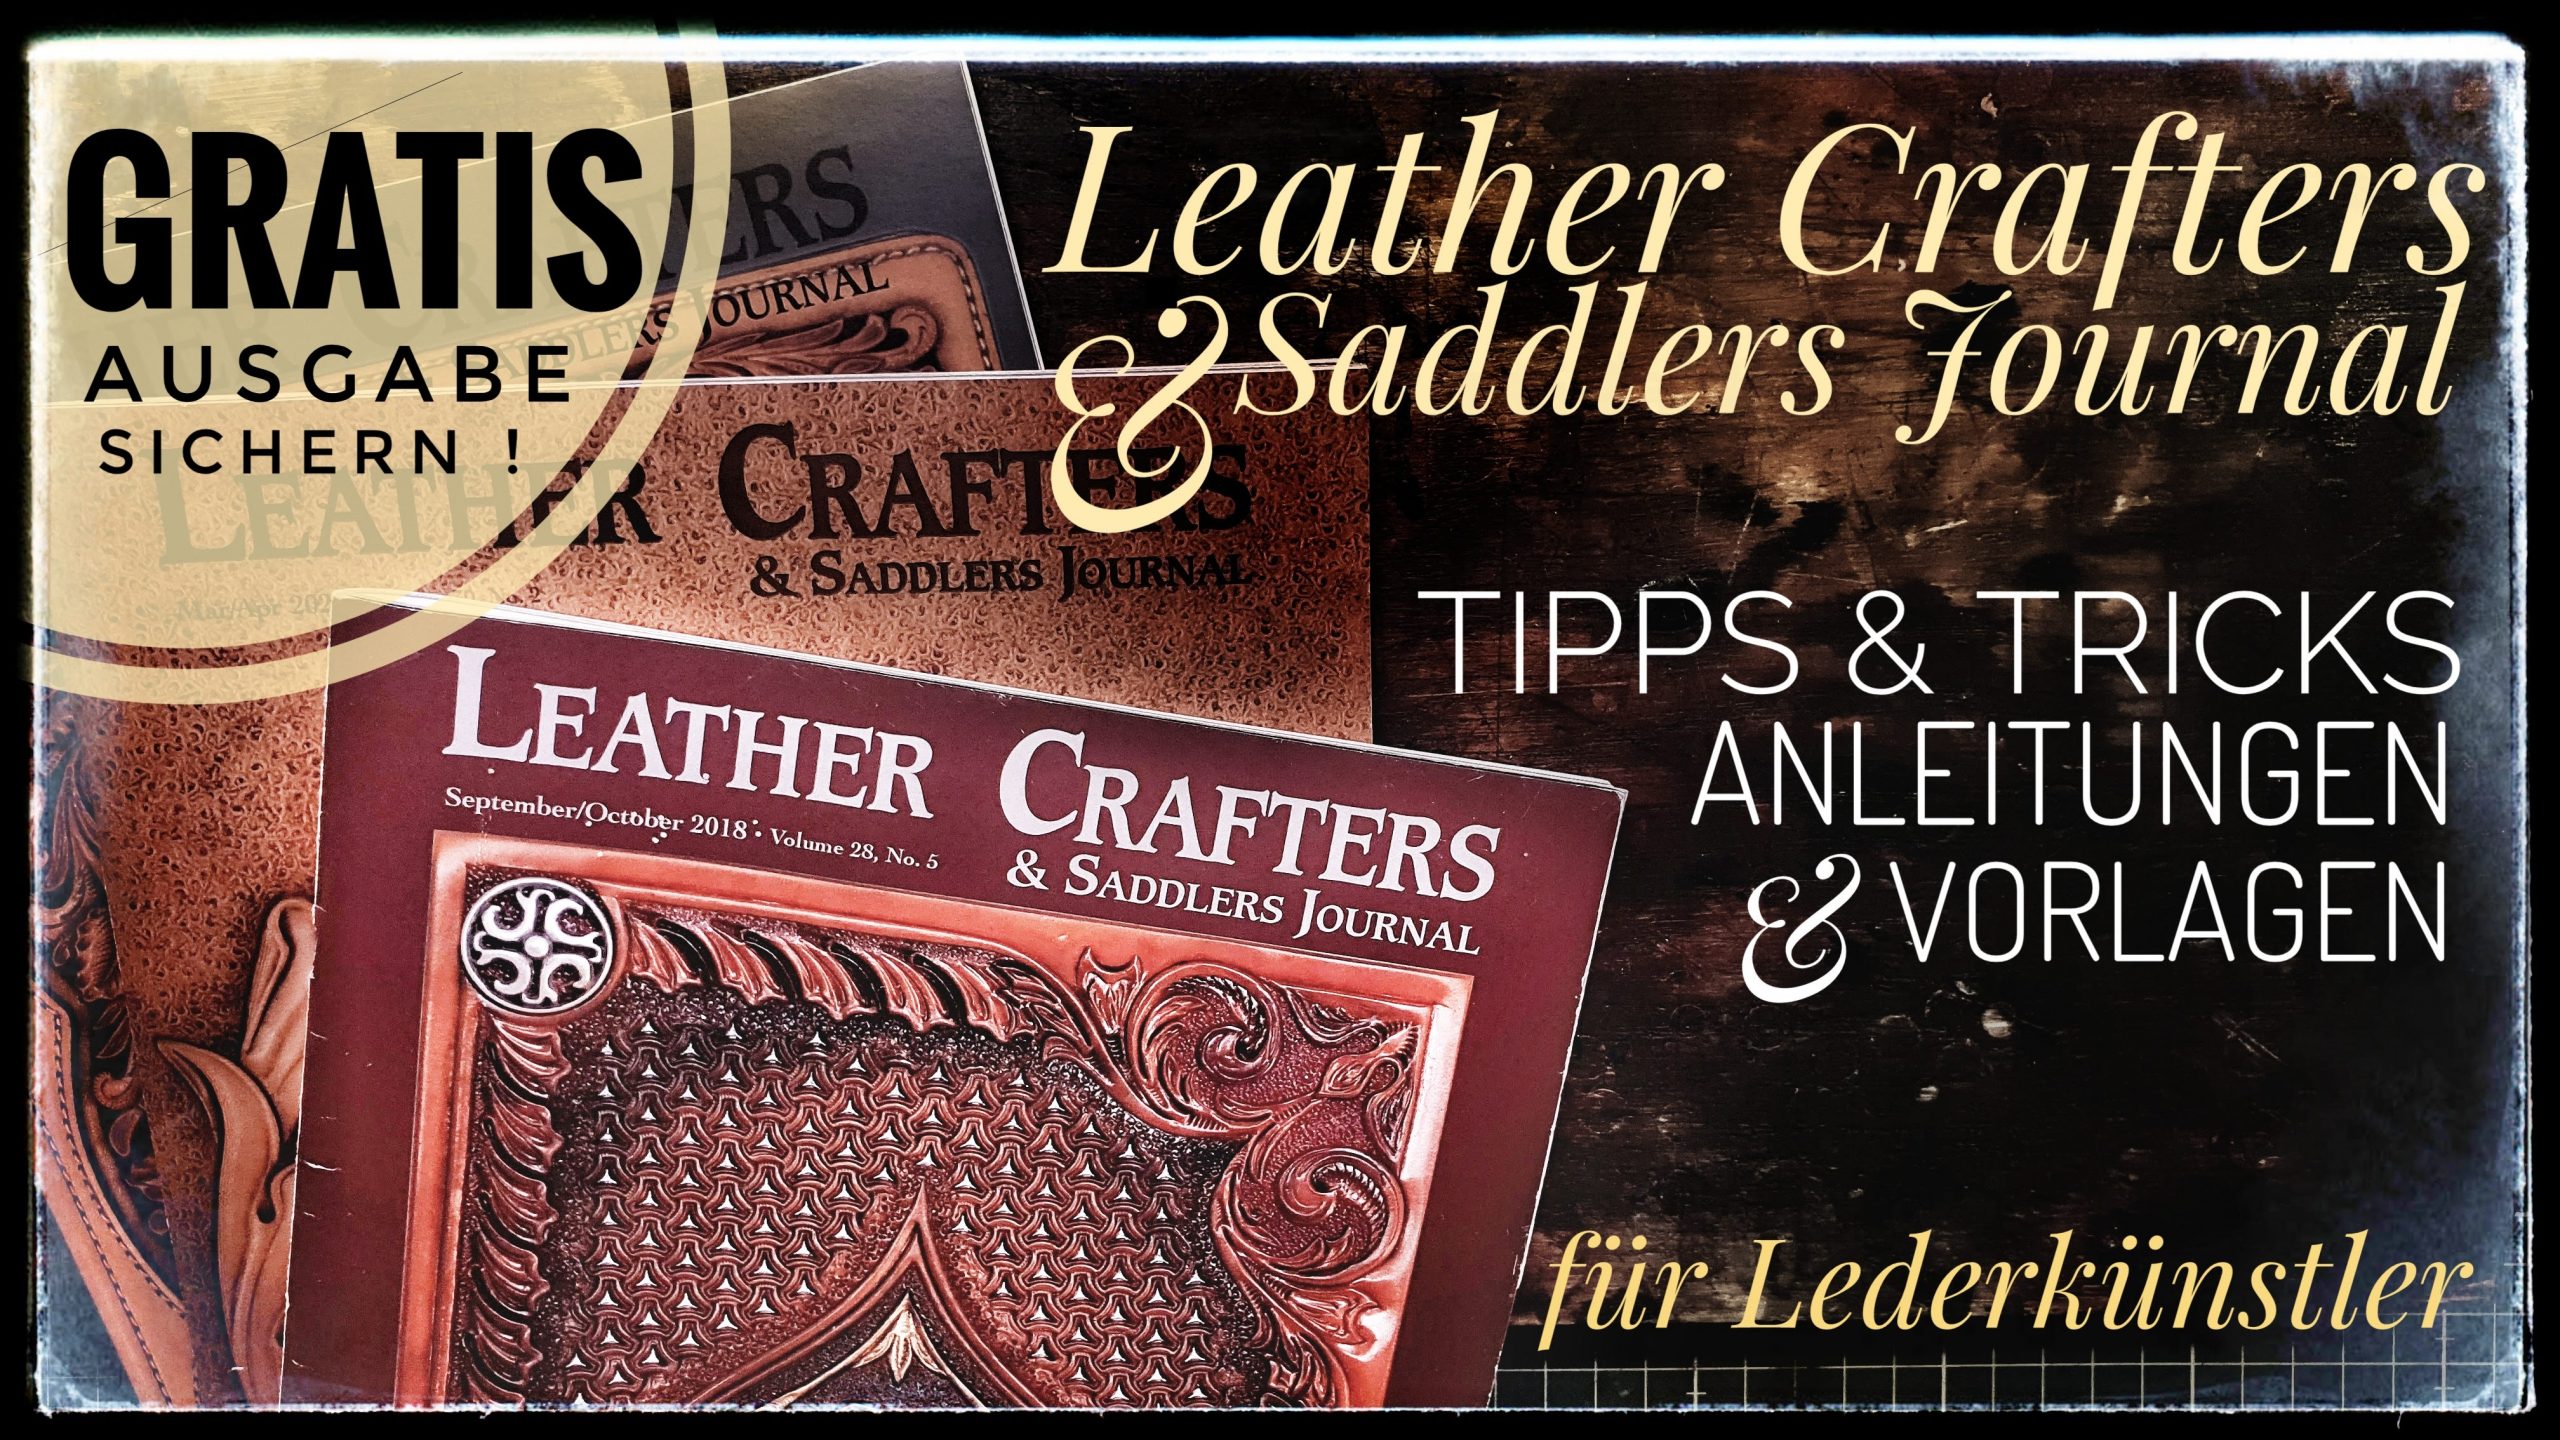 Leather Crafters & Saddlers Journal